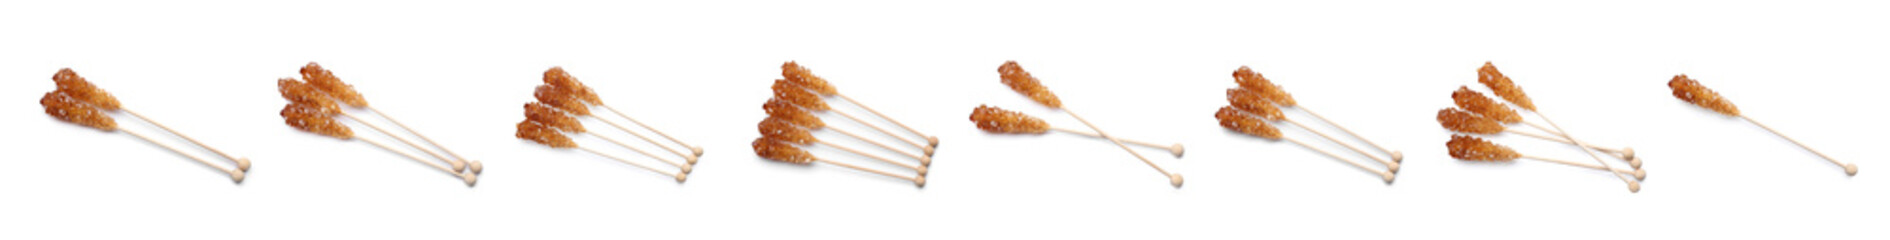 Wall Mural - Set of wooden sticks with sugar crystals on white background, banner design. Tasty rock candies